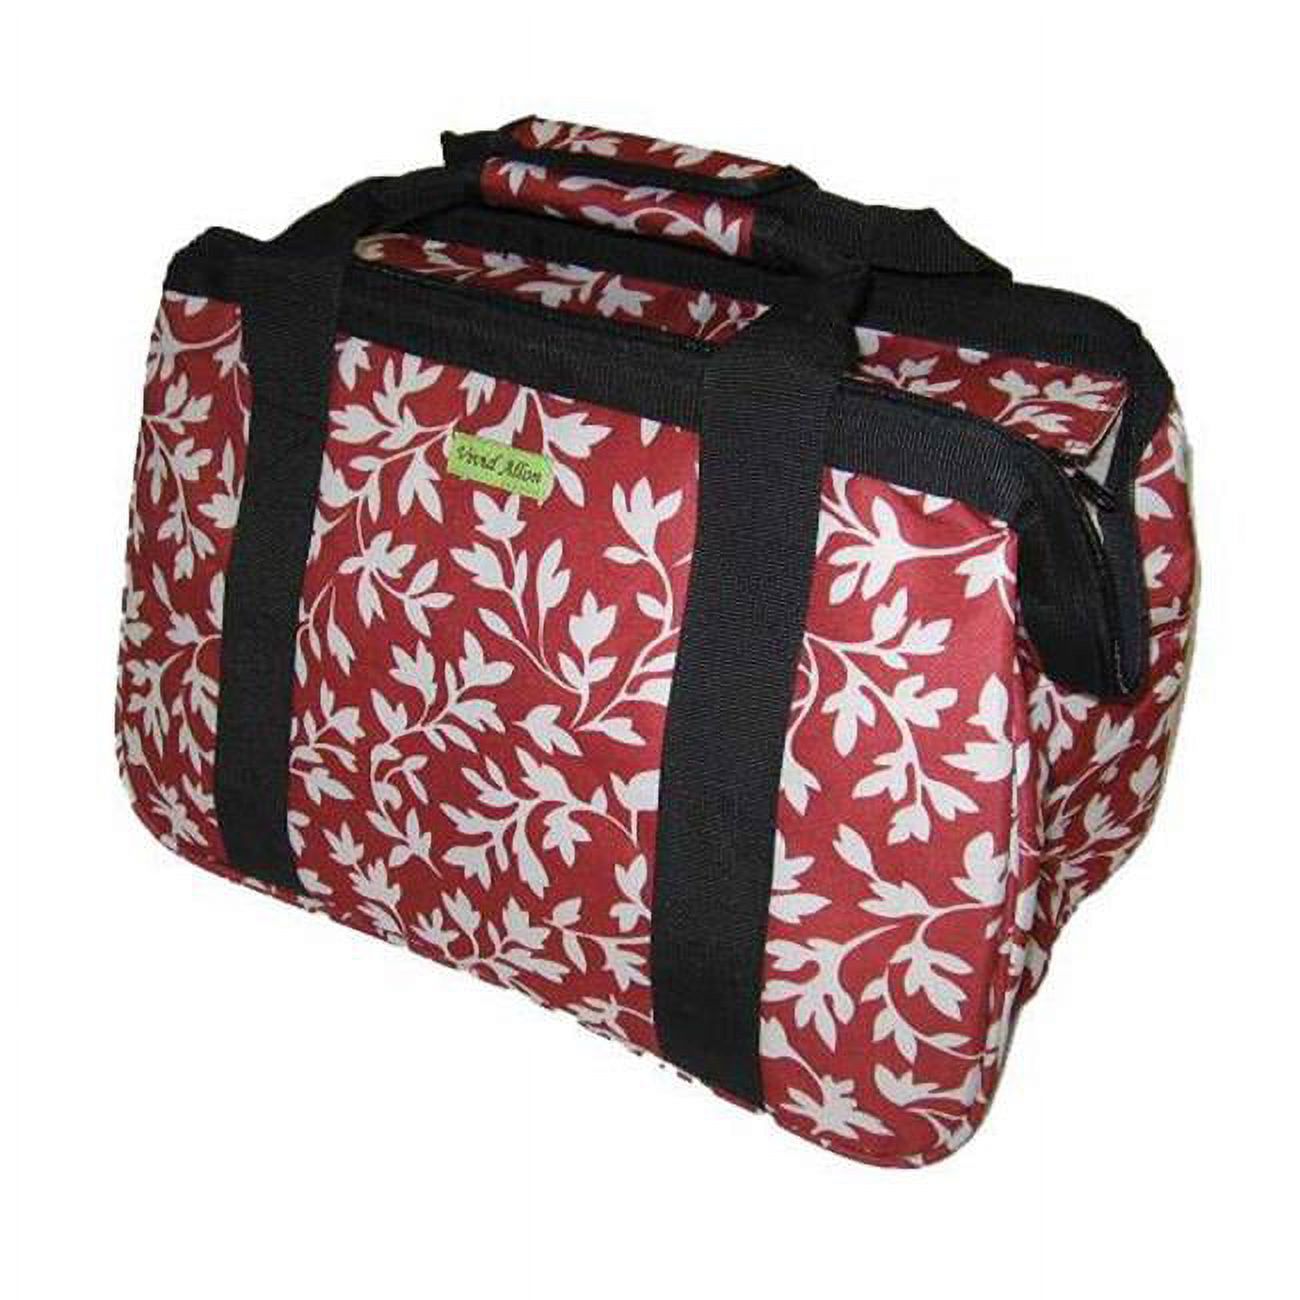 JanetBasket Red Floral Eco Bag, 18" x 10" x 12" - image 1 of 2